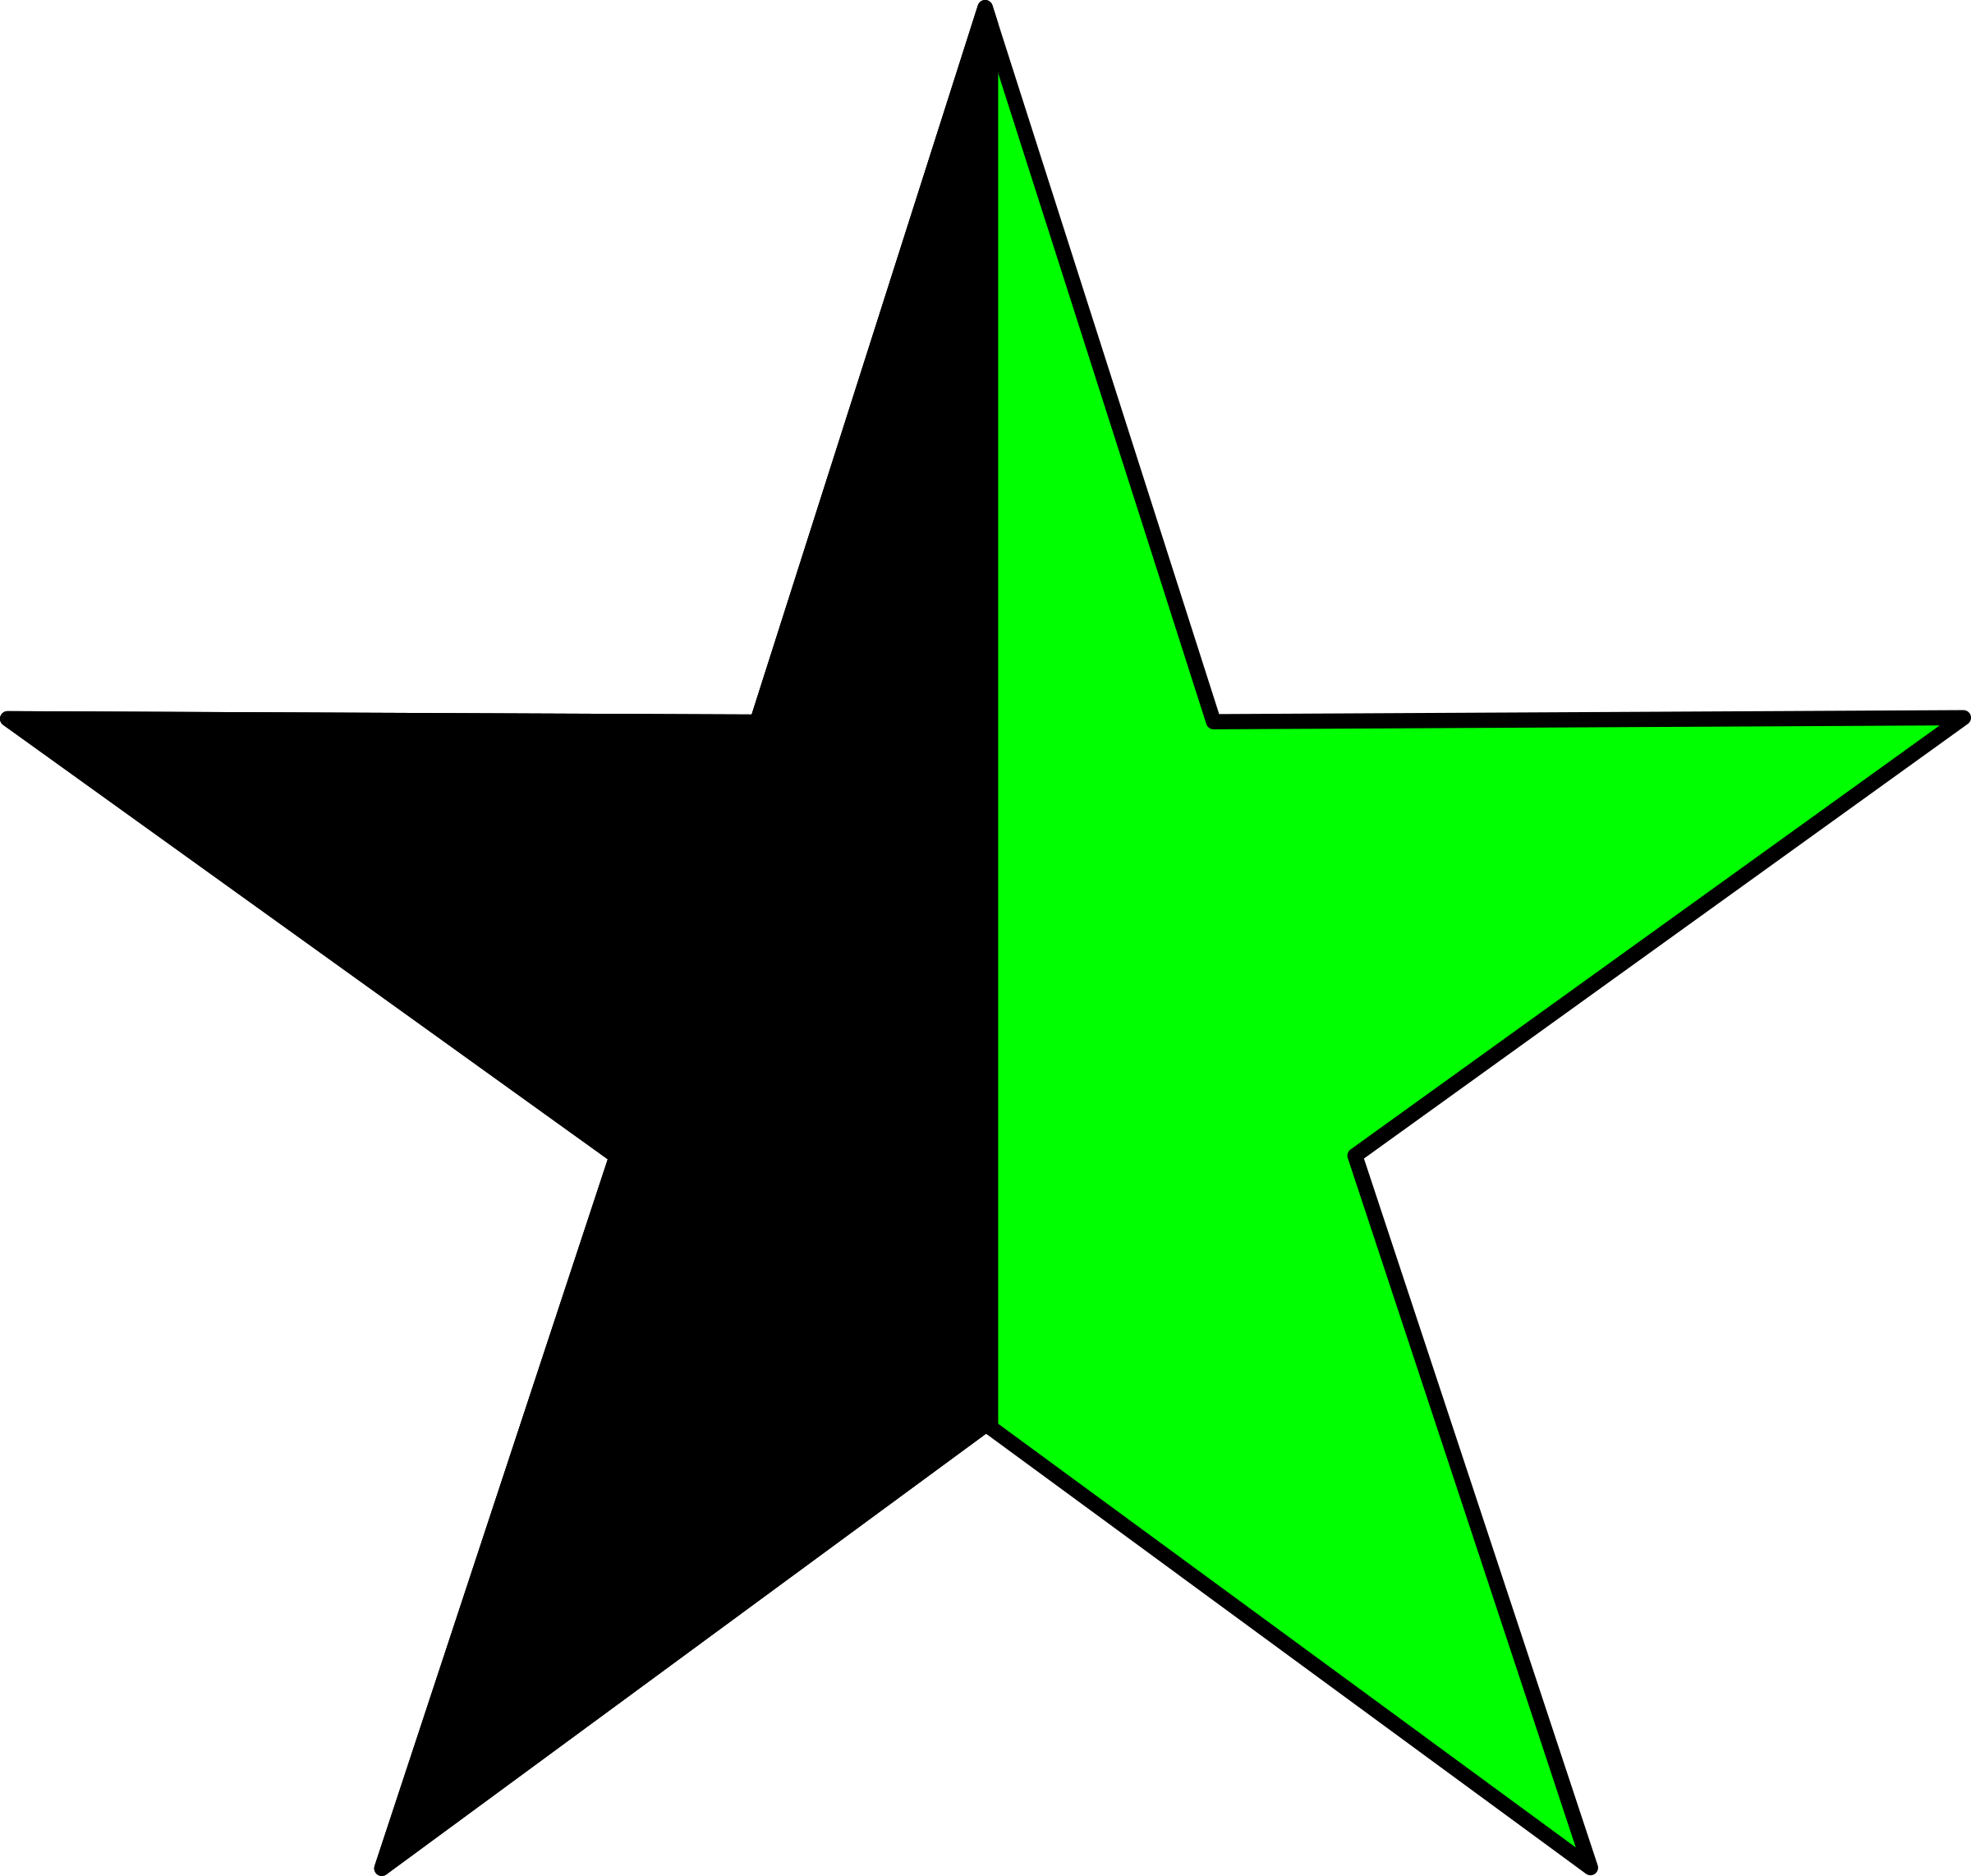 Download Green Anarchism Green Anarchy Anarcho Communism Bintang Hijau Png Png Image With No Background Pngkey Com